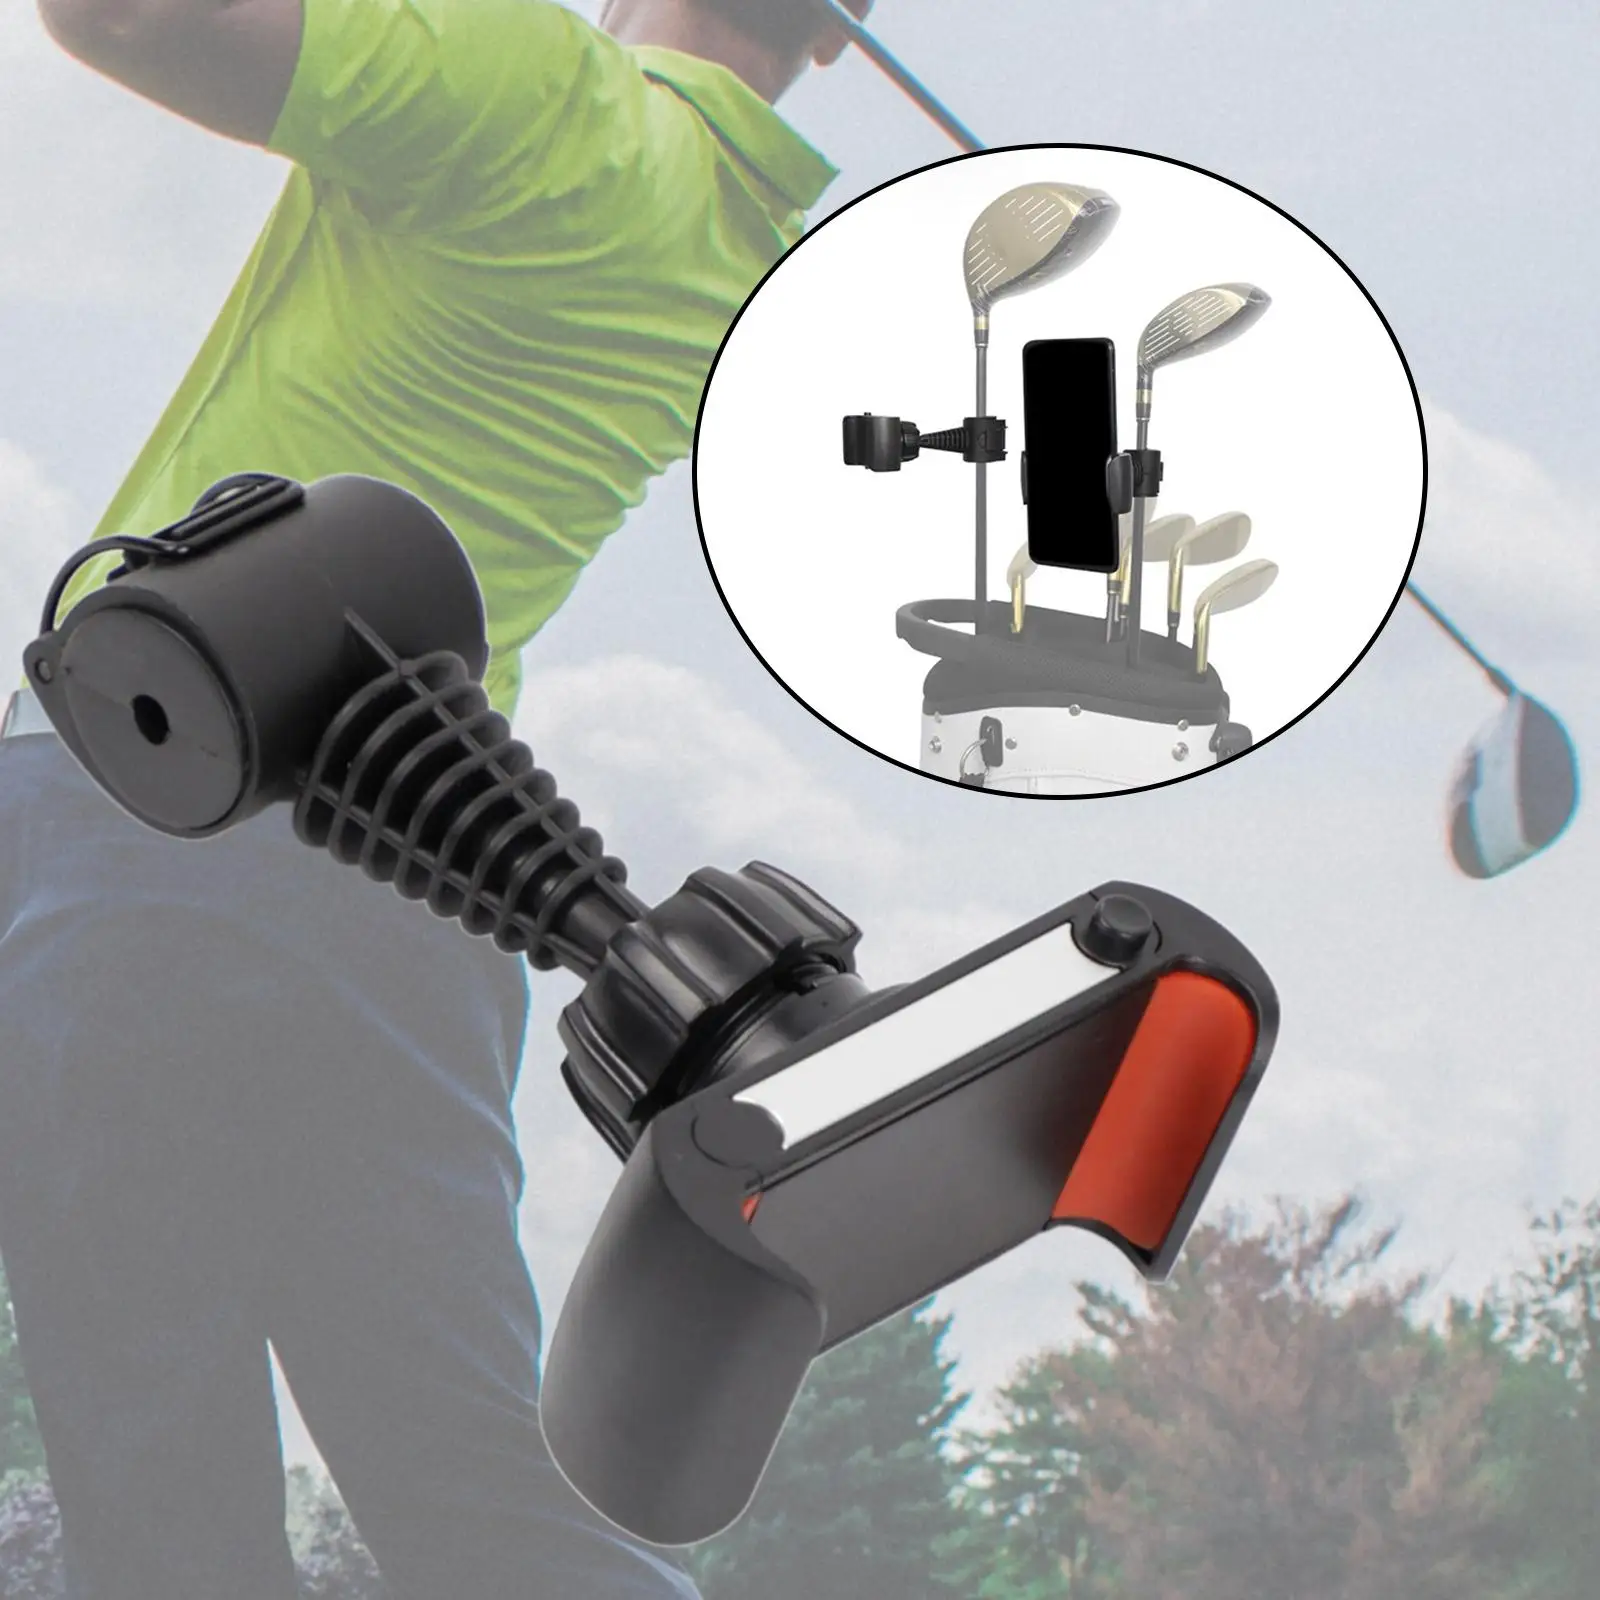 Golf Phone Holder Accessories Multipurpose Training Aid Replaces Clip Mount for Mobile Swing Recording Camera Cell Phone Putting